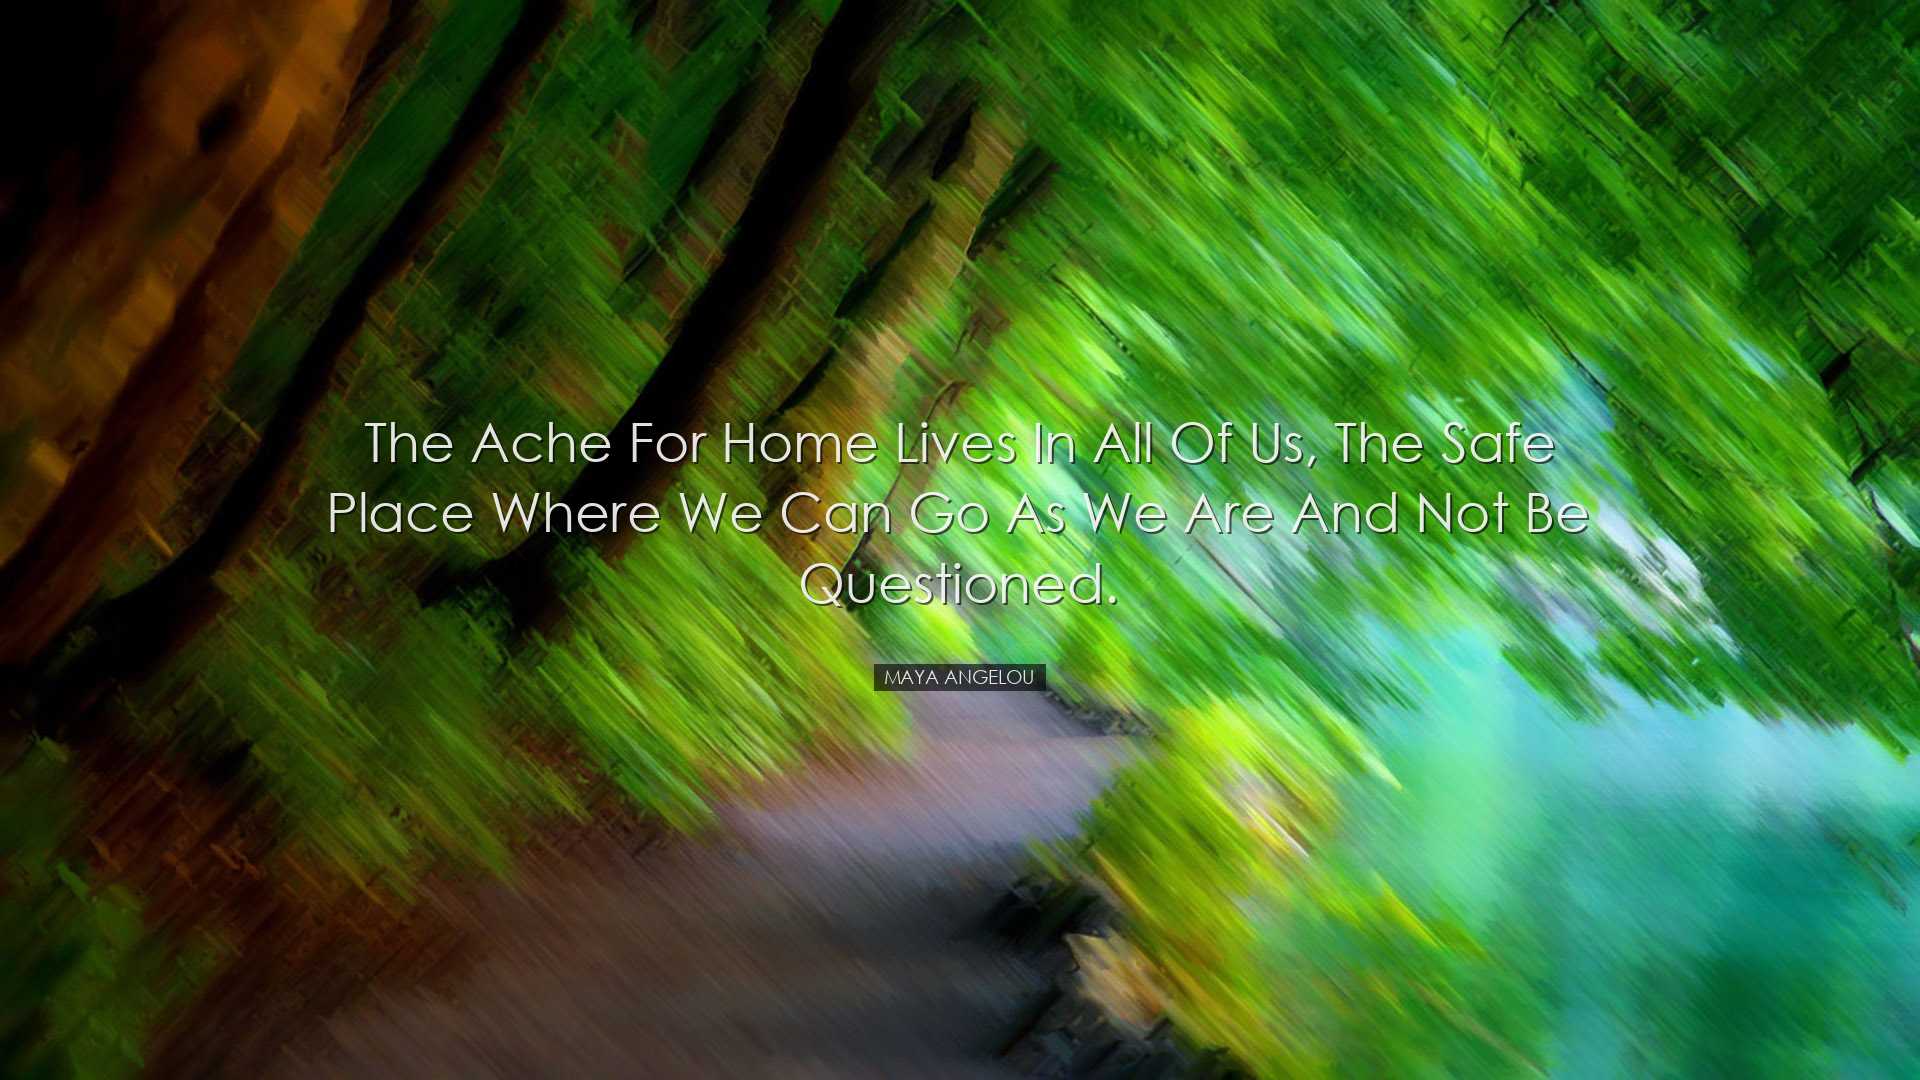 The ache for home lives in all of us, the safe place where we can